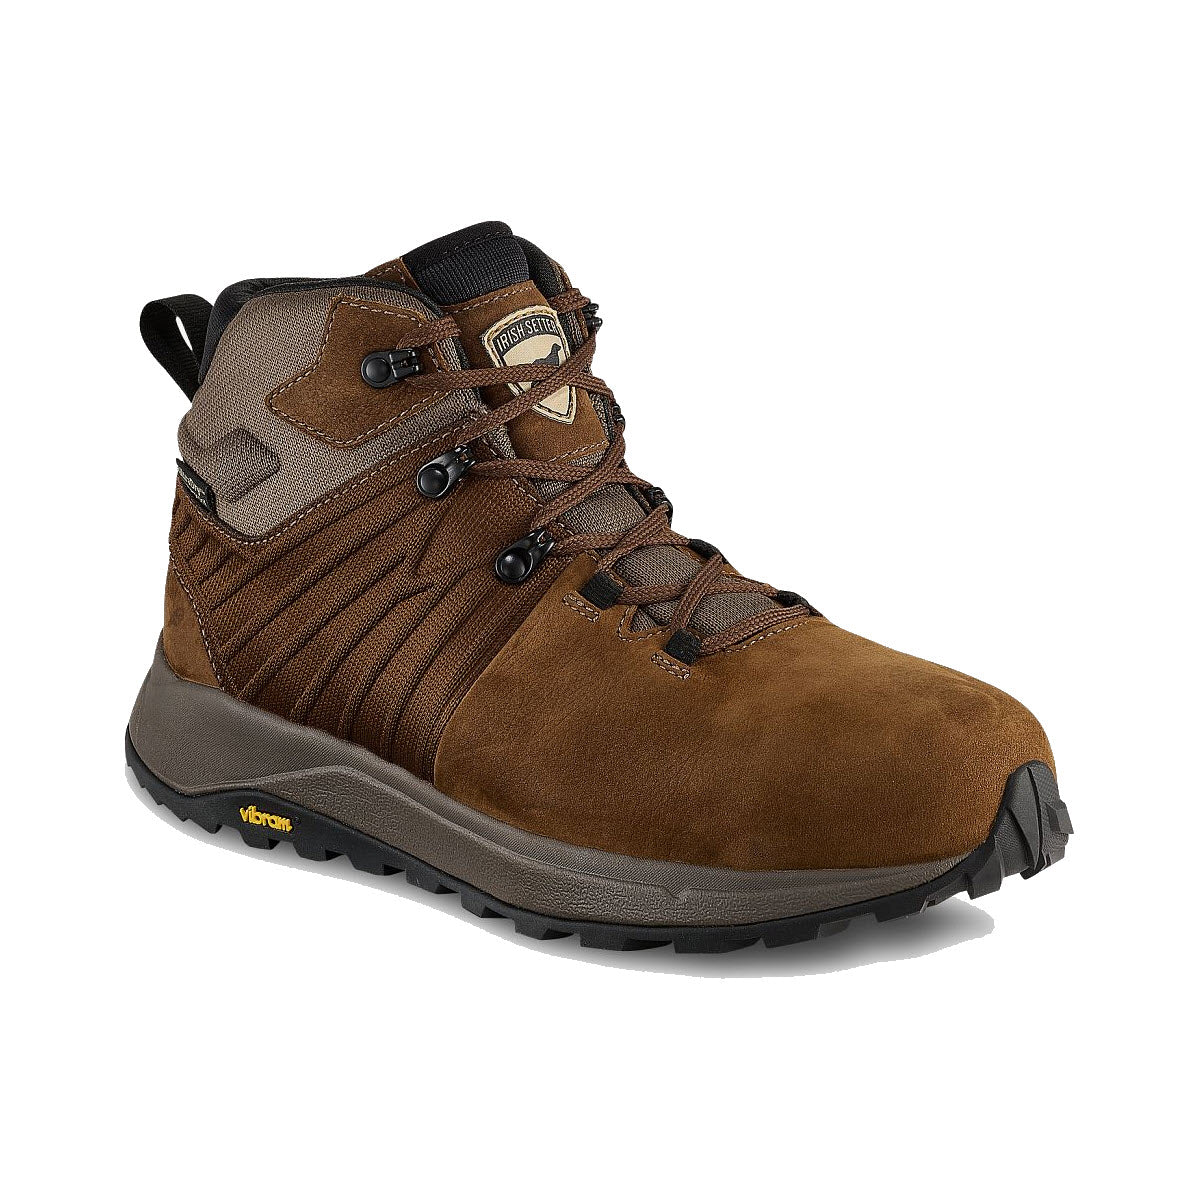 Brown Irish Setter Cascade work boot with metal eyelets and a Vibram® Bayu sole, displayed against a white background.